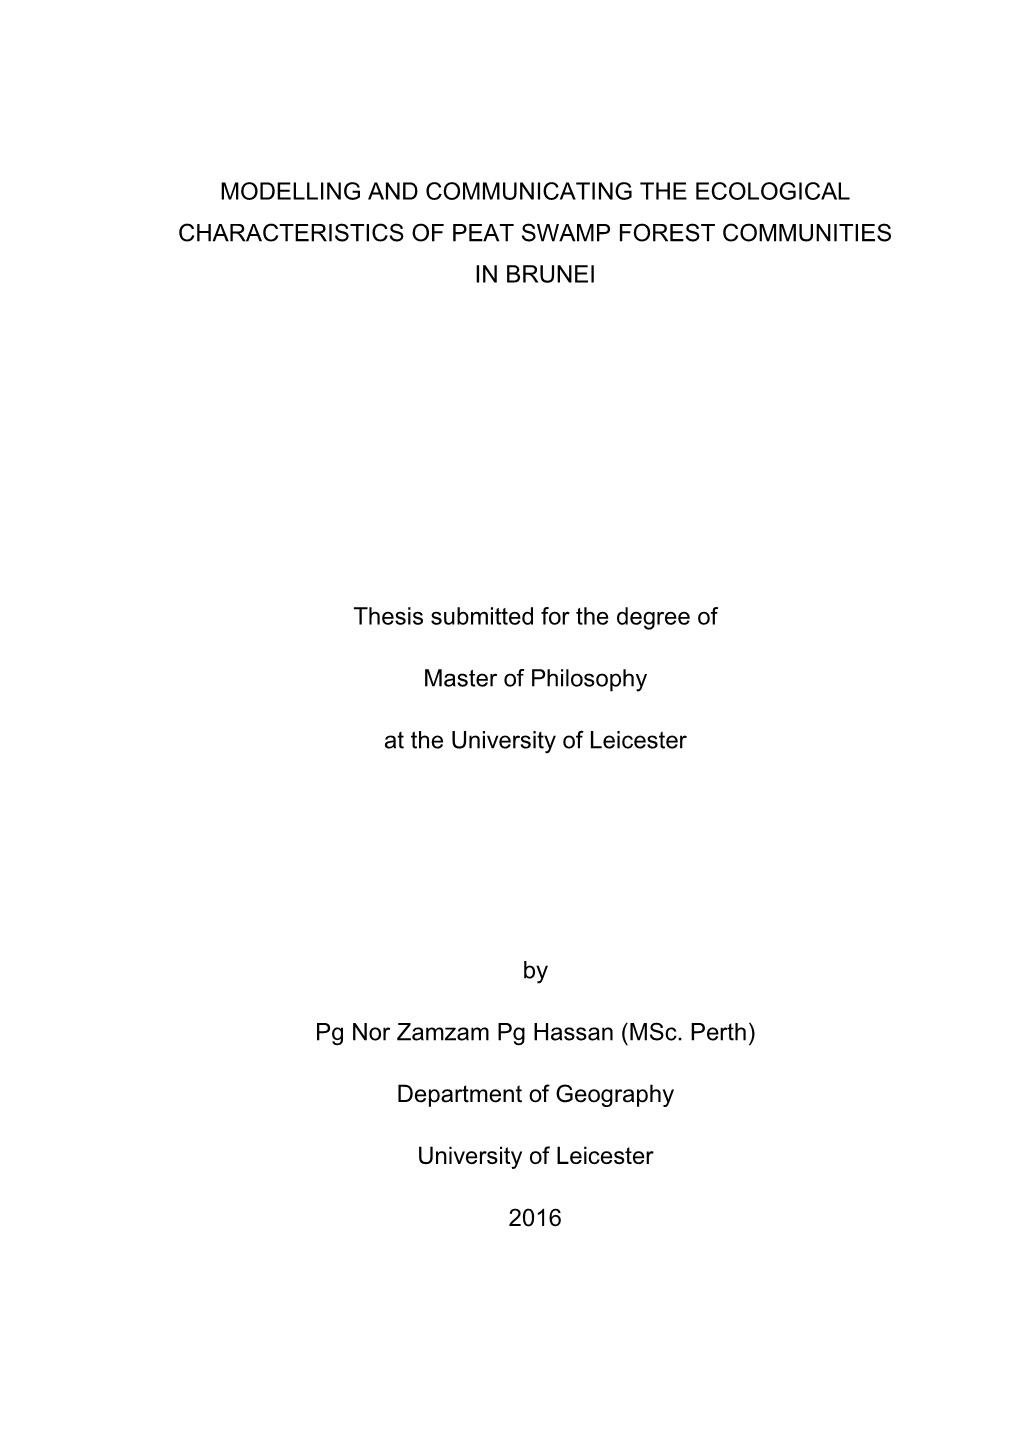 Modelling and Communicating the Ecological Characteristics of Peat Swamp Forest Communities in Brunei